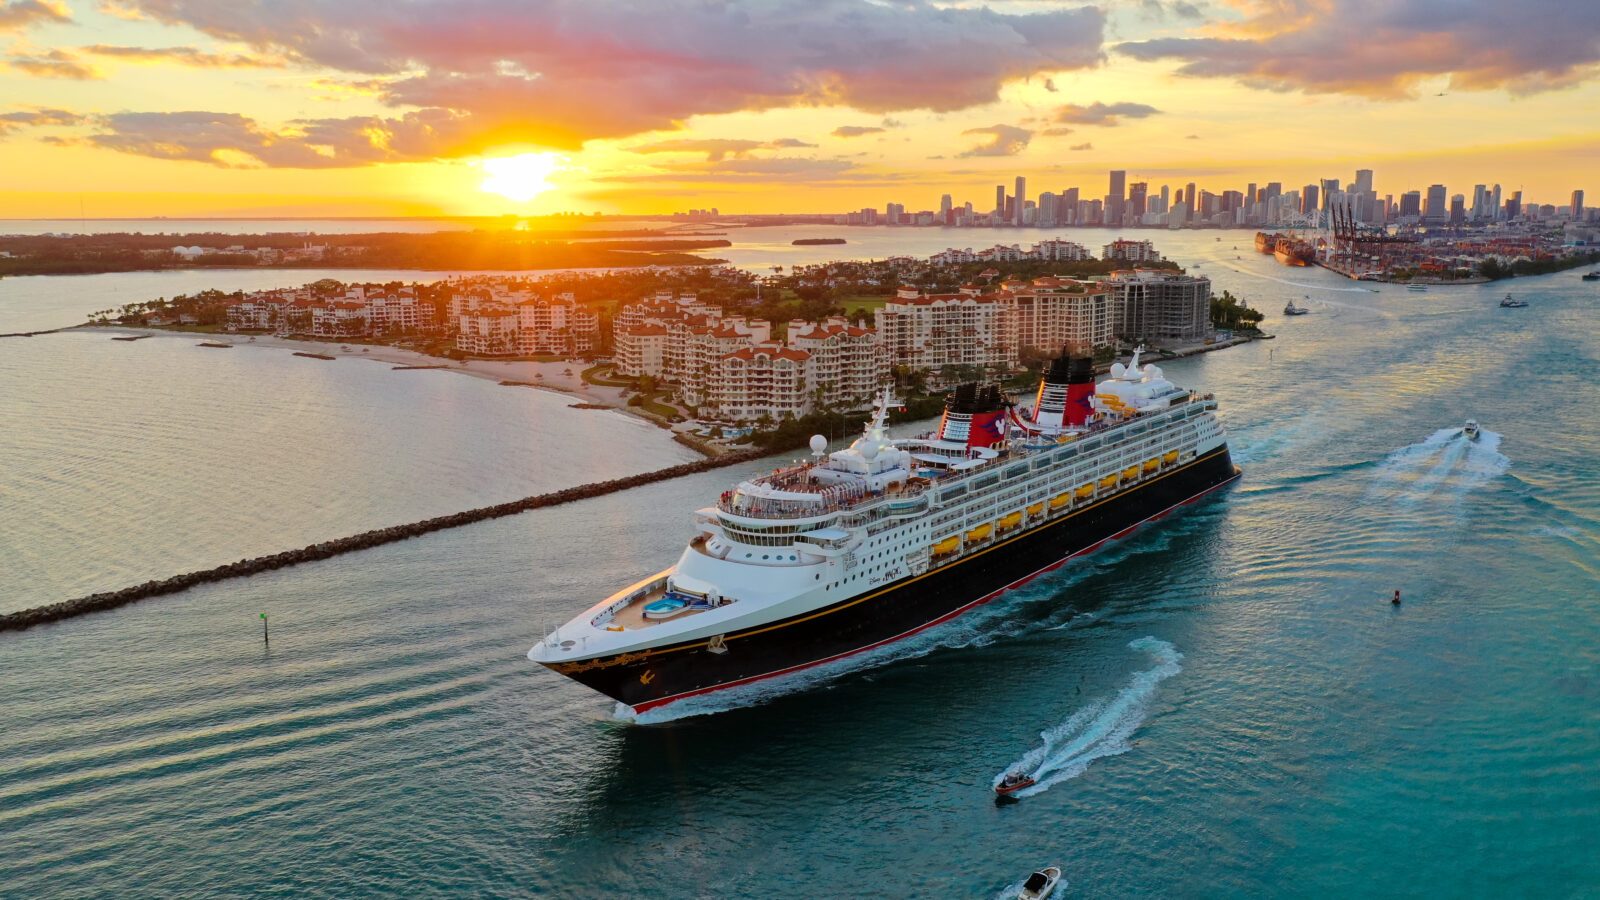 Disney cruise packing list for cruise ship sailing in pretty sunset